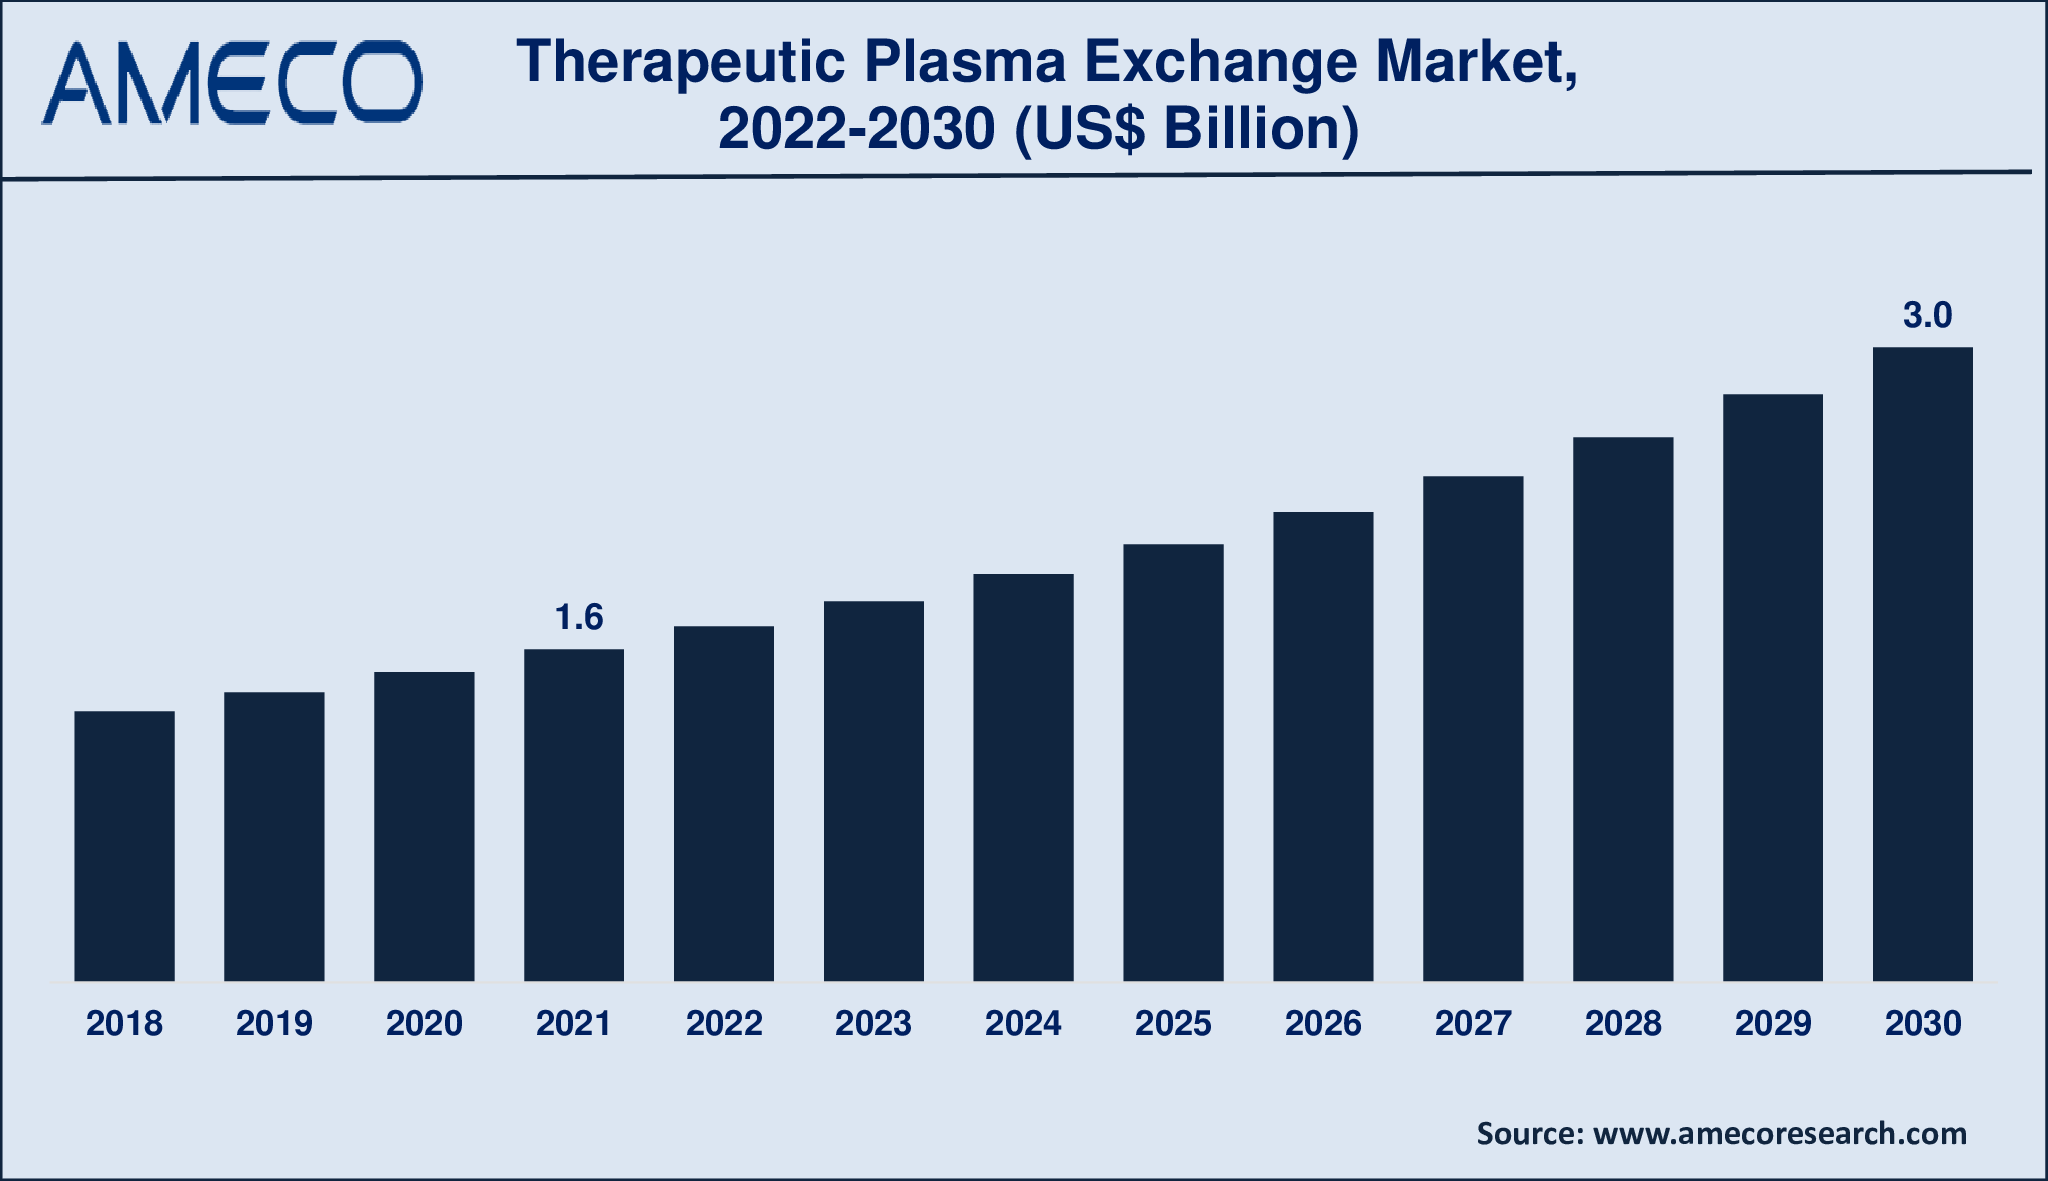 Therapeutic Plasma Exchange Market Size, Share, Growth, Trends, and Forecast 2022-2030